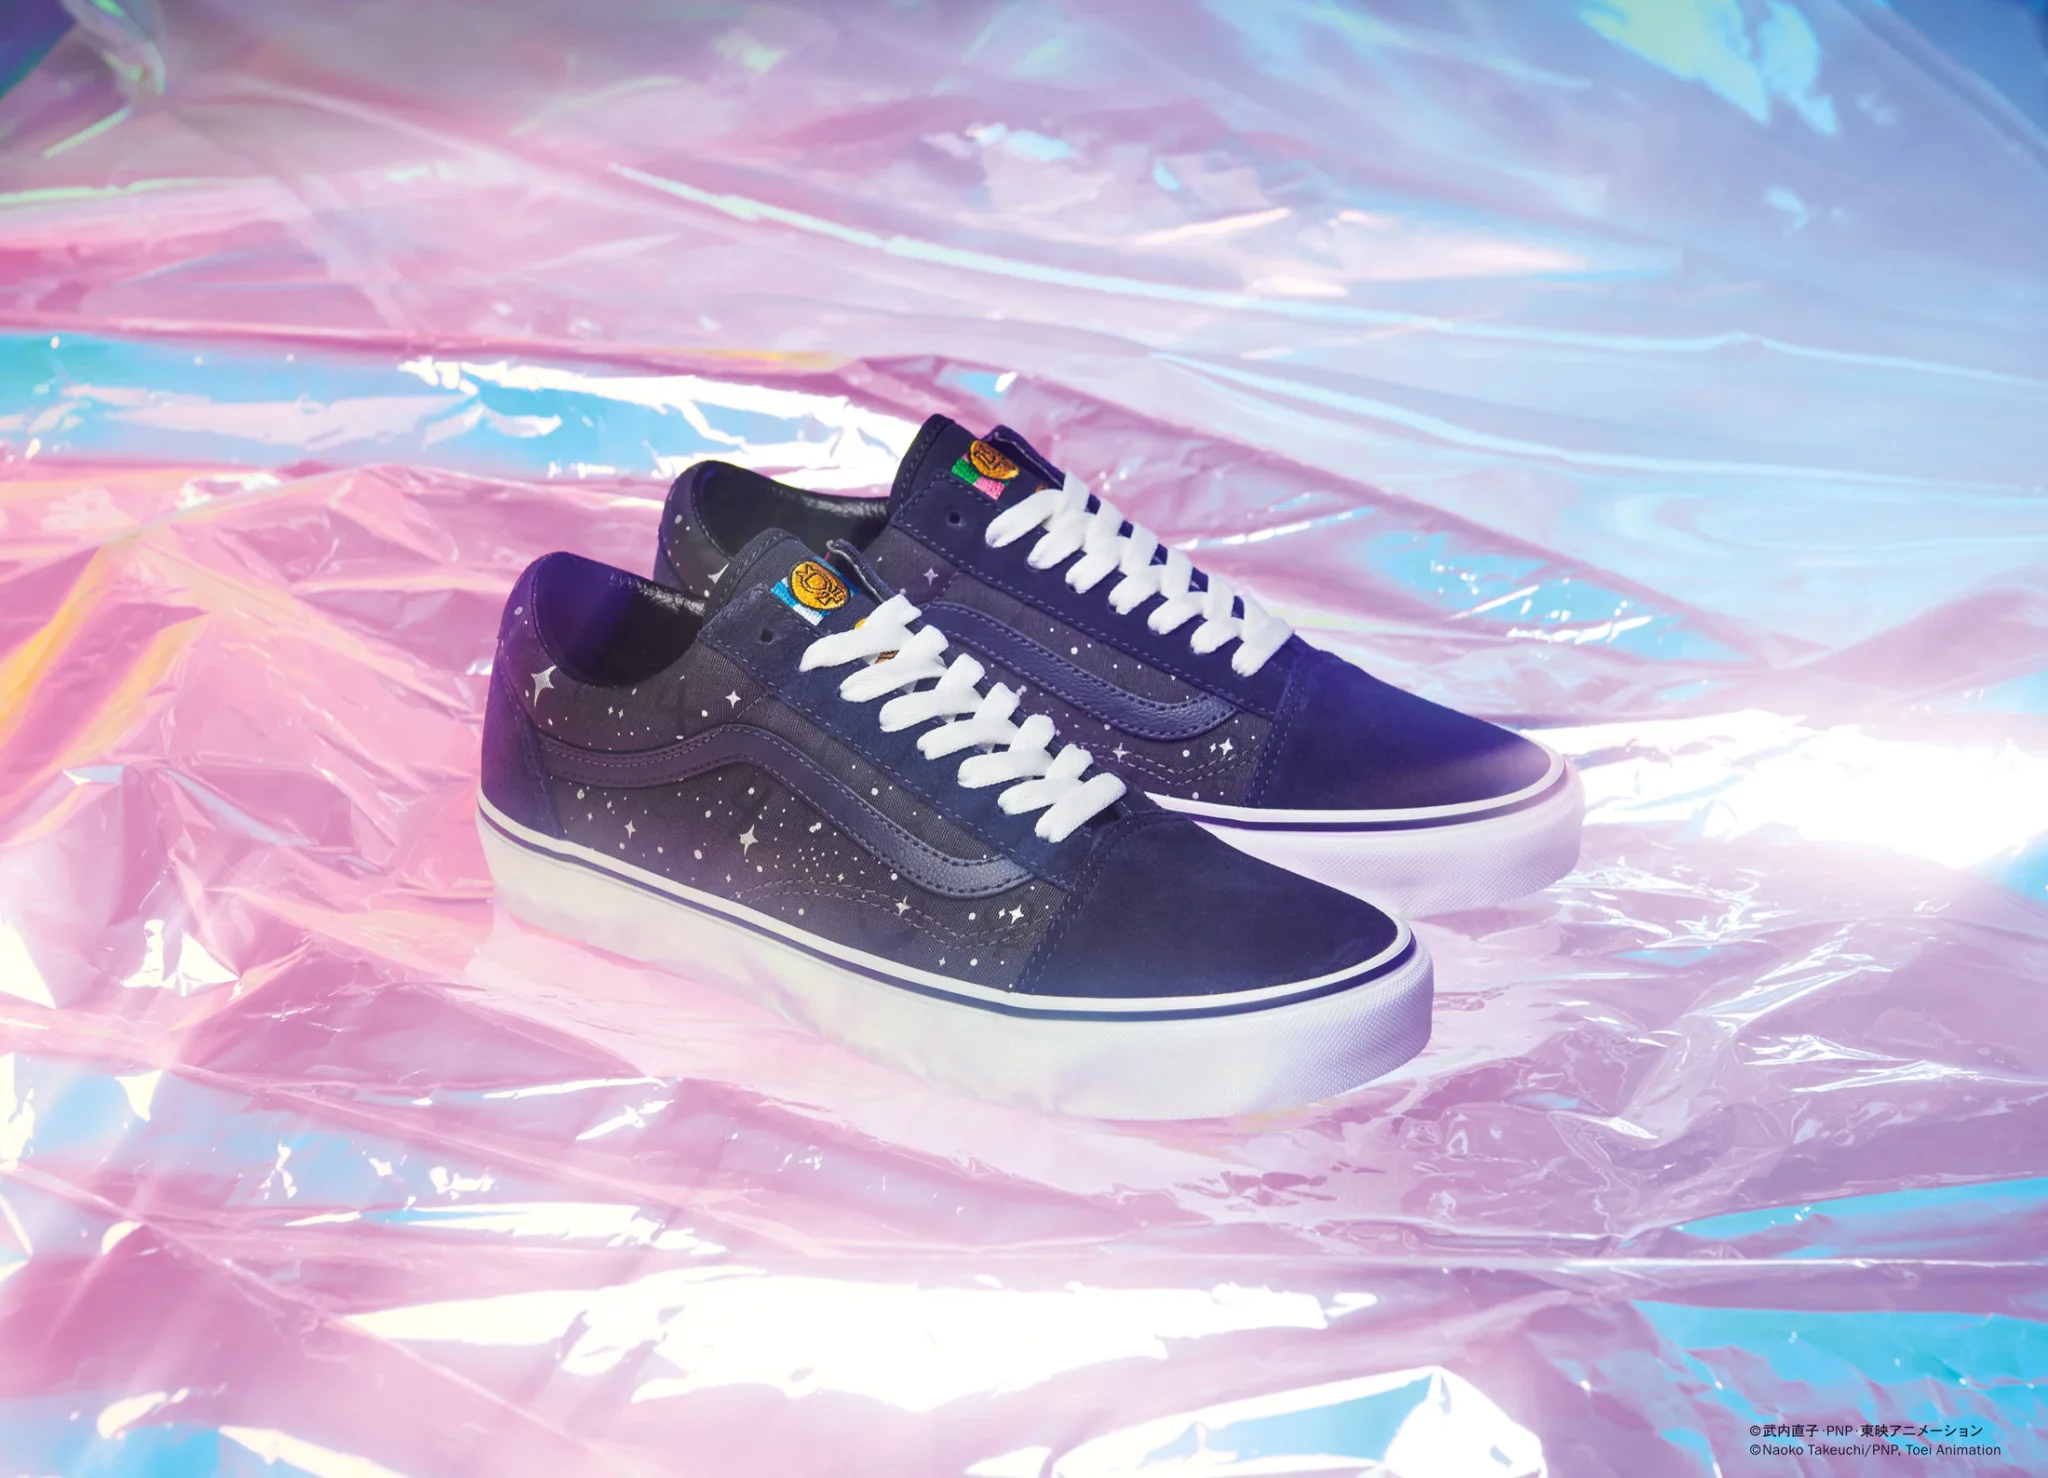 vans sailor moon collection 5 scaled